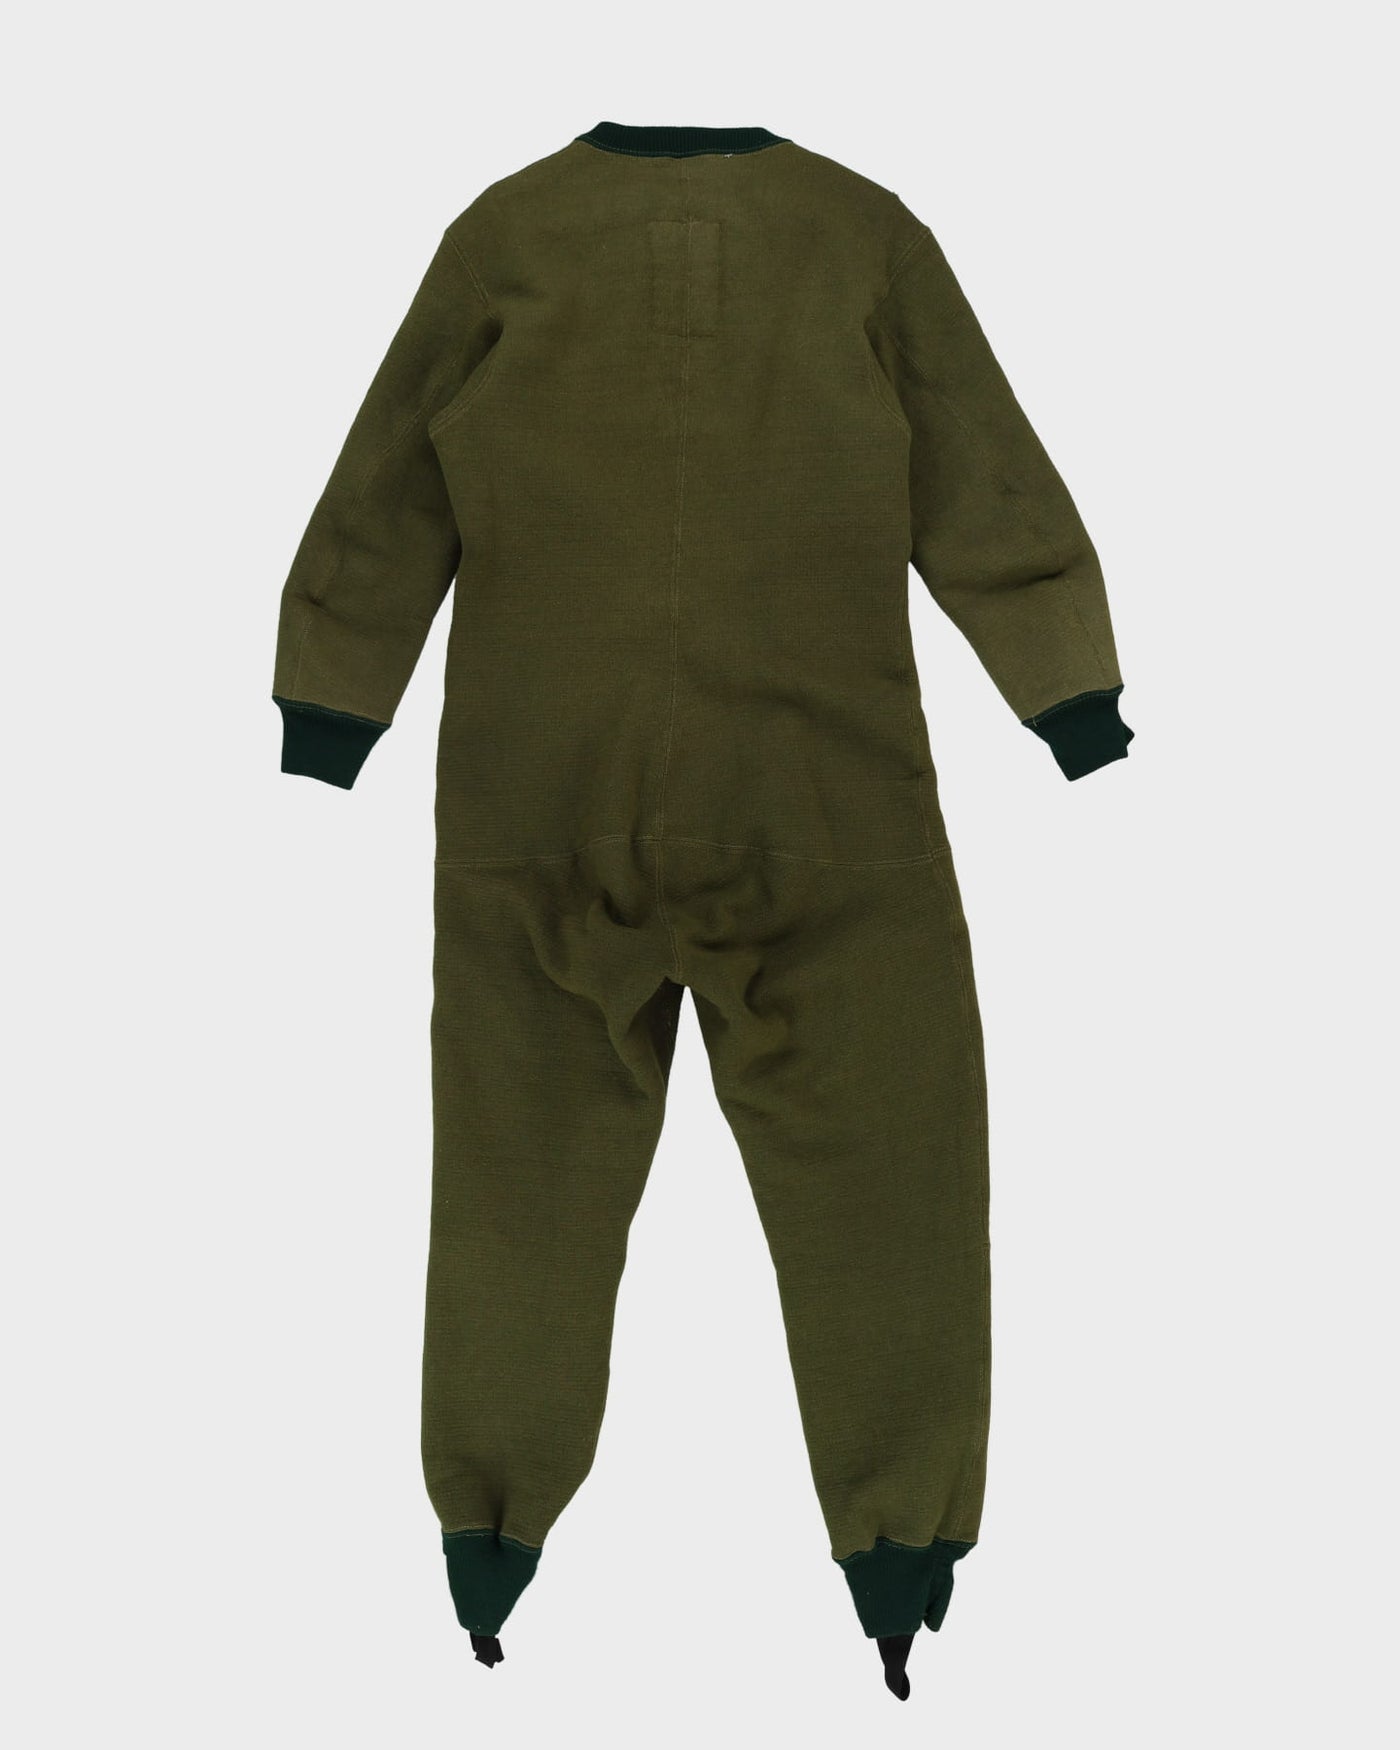 Vintage 1971 Dated Royal Air Force Aircrew Thermal Inner Coveralls - Small